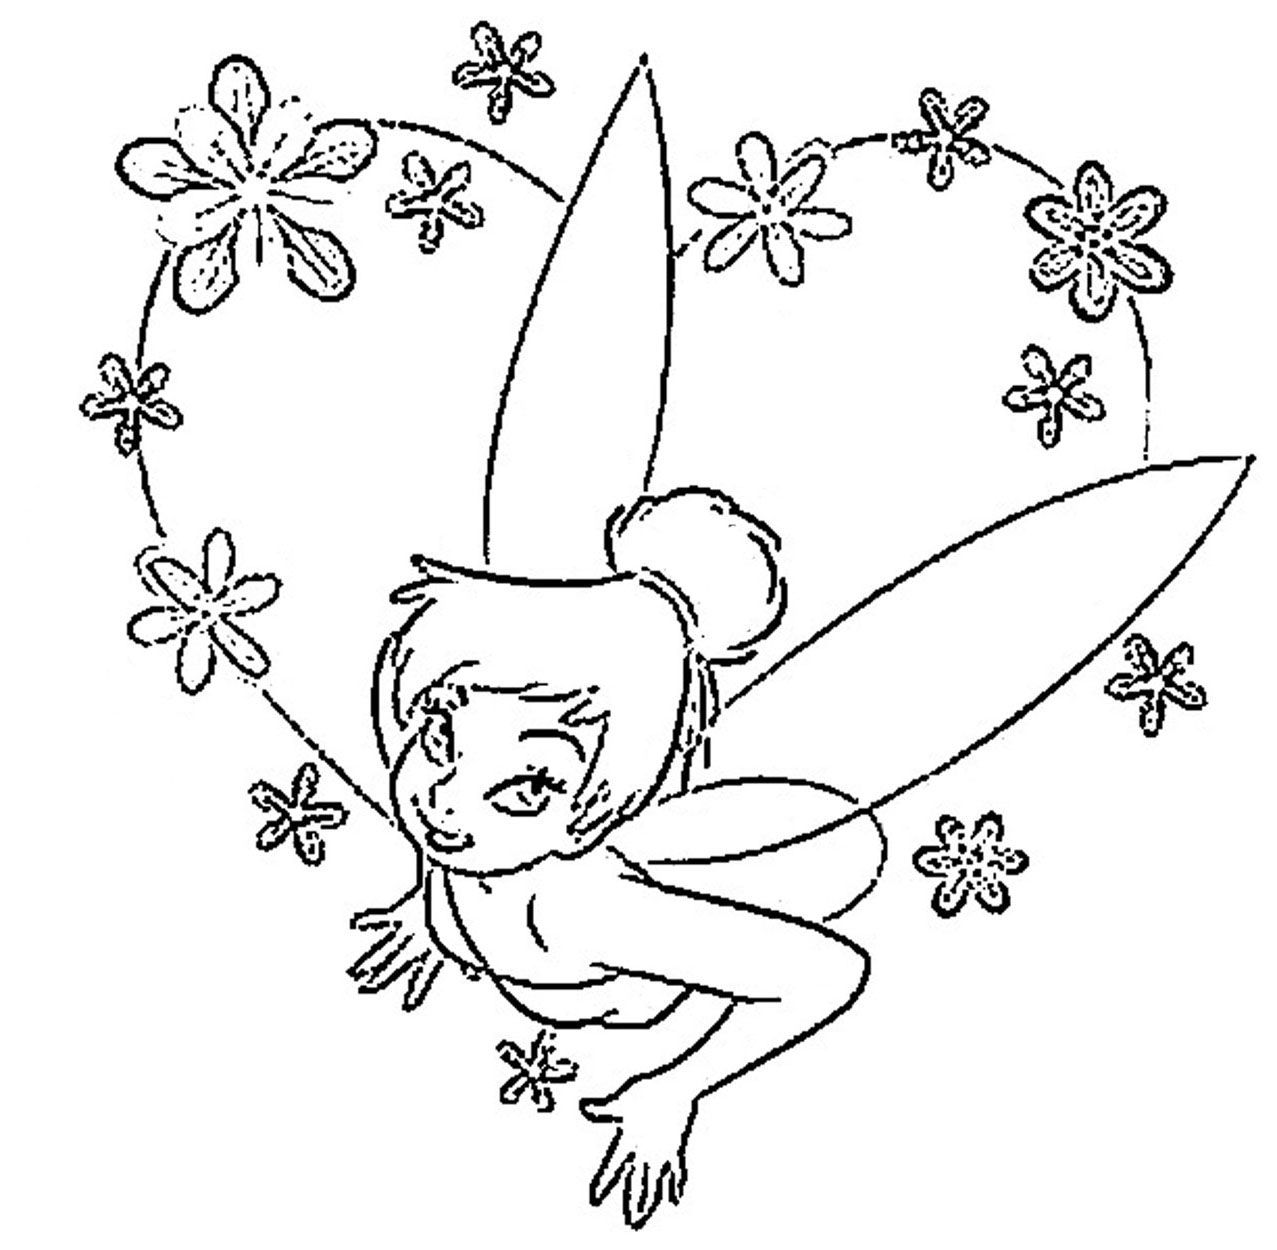 Amazing of Incridible Printable Tinkerbell Coloring Pages #2581